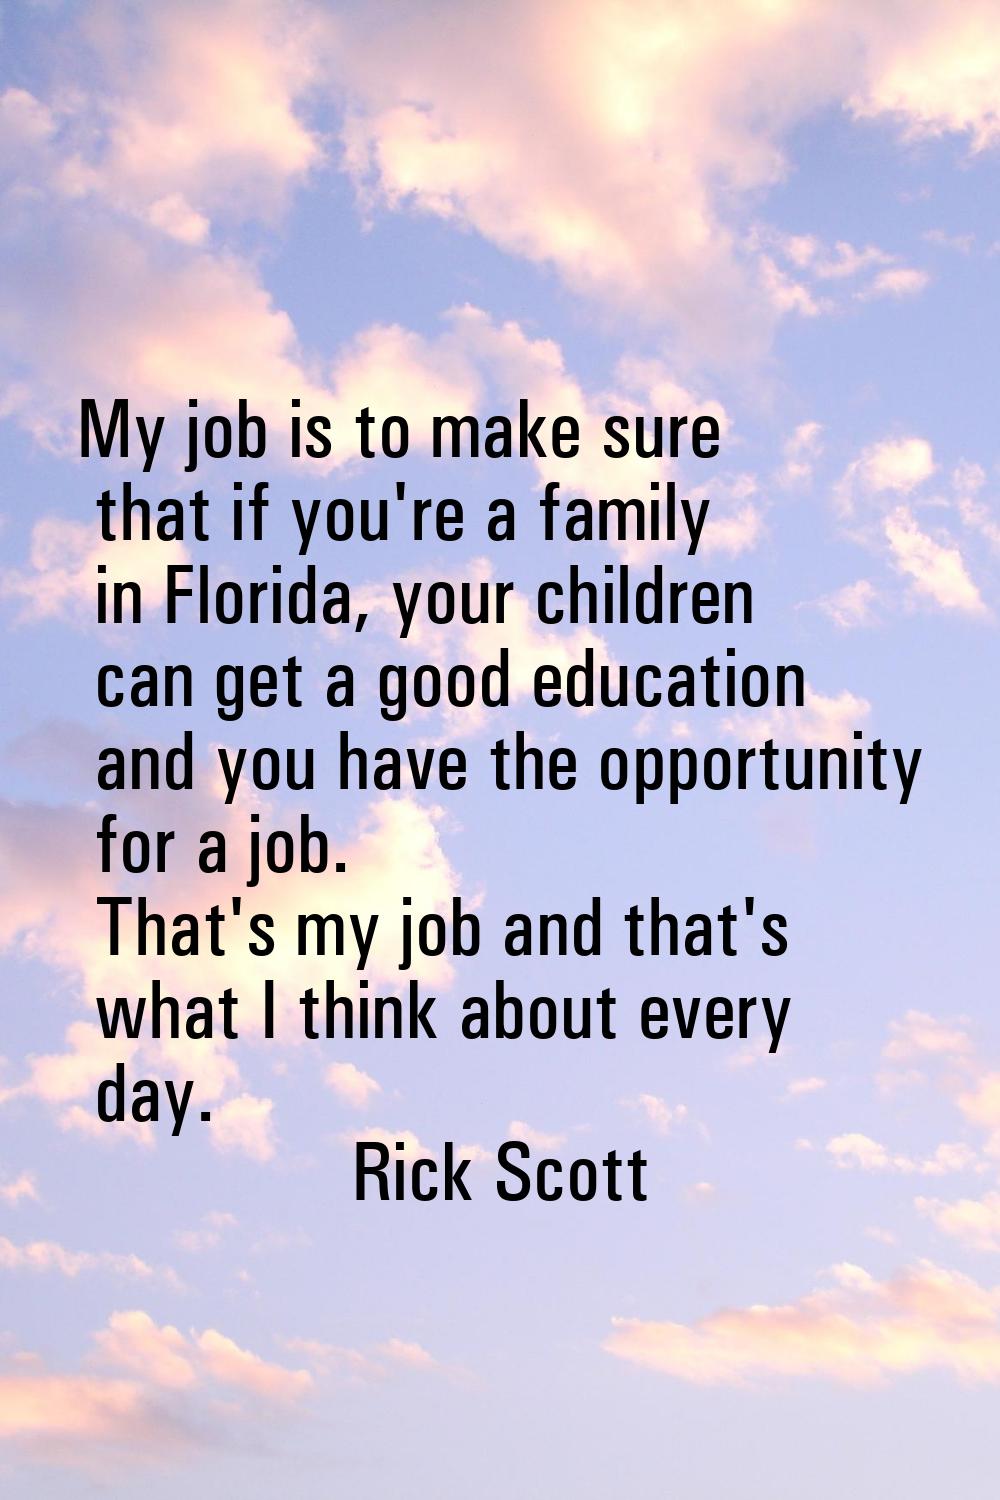 My job is to make sure that if you're a family in Florida, your children can get a good education a